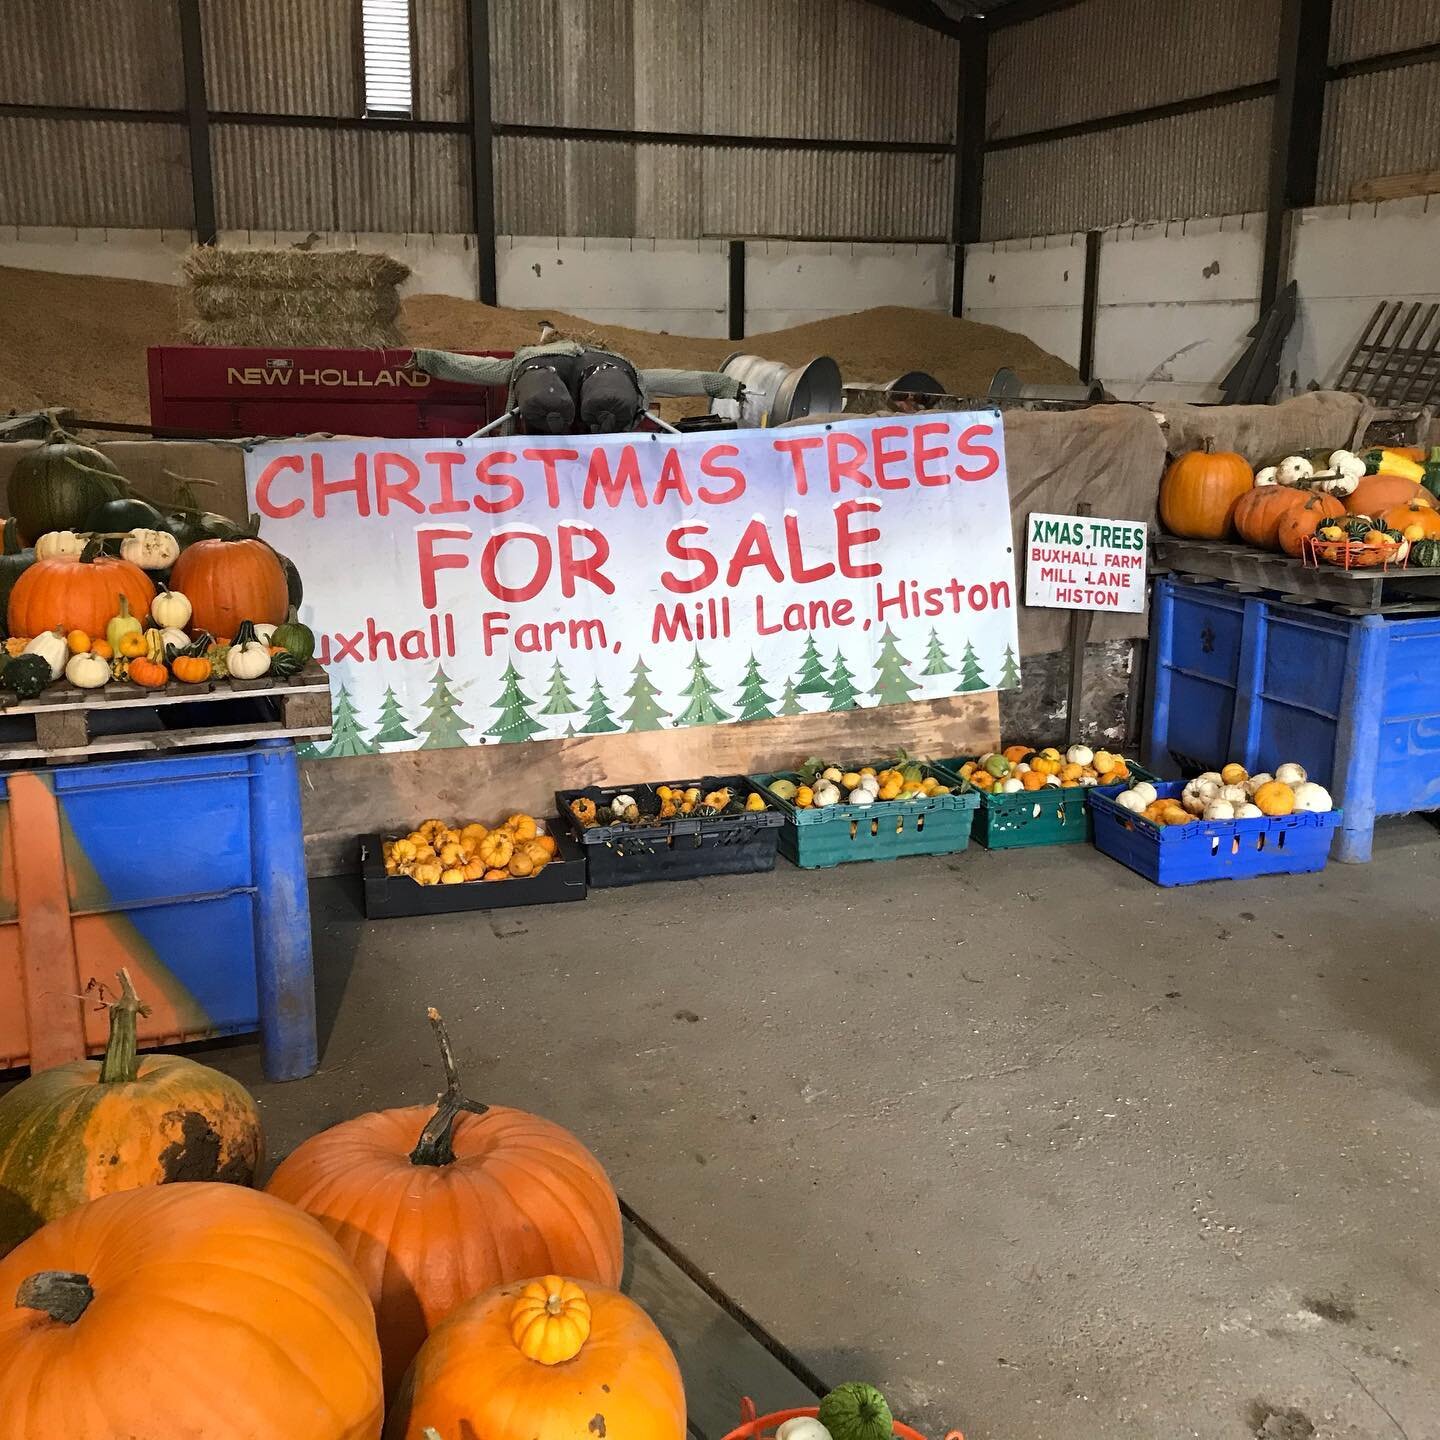 Busy planning click and collect options of Nordman Christmas trees from 28th November - please see our Facebook page and website for further details